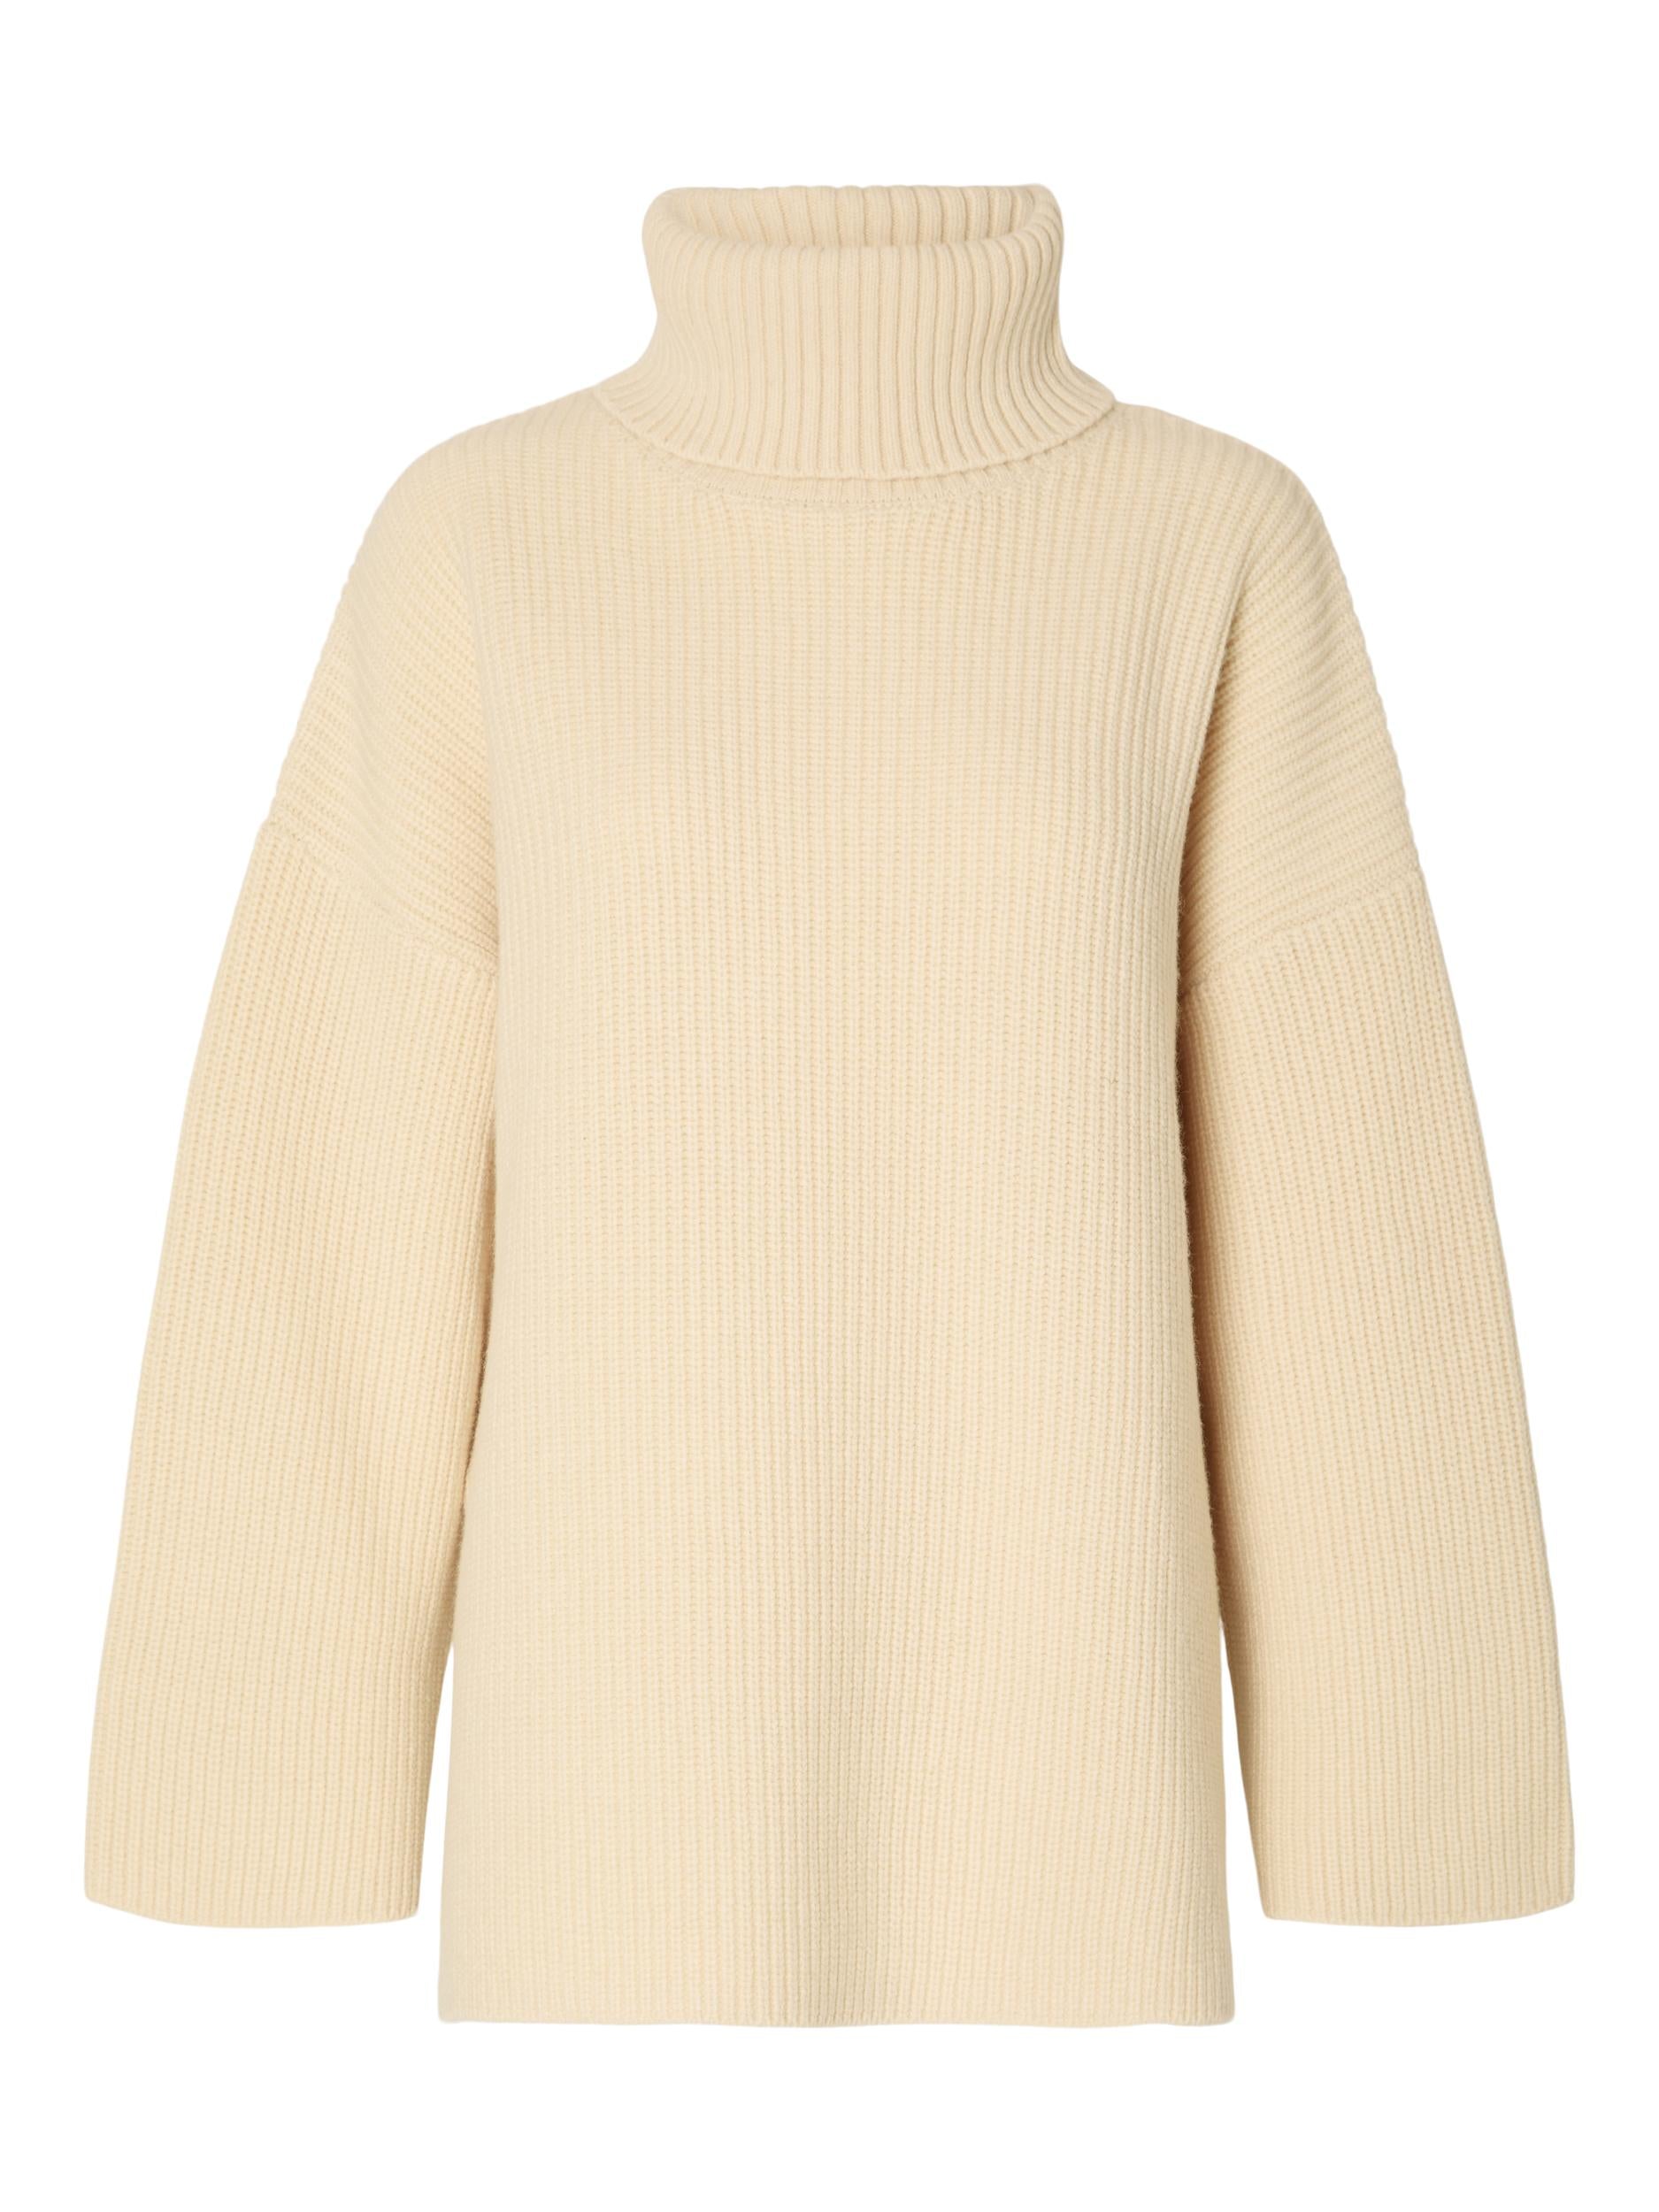 Selected Femme "Mary" Long Knit birch